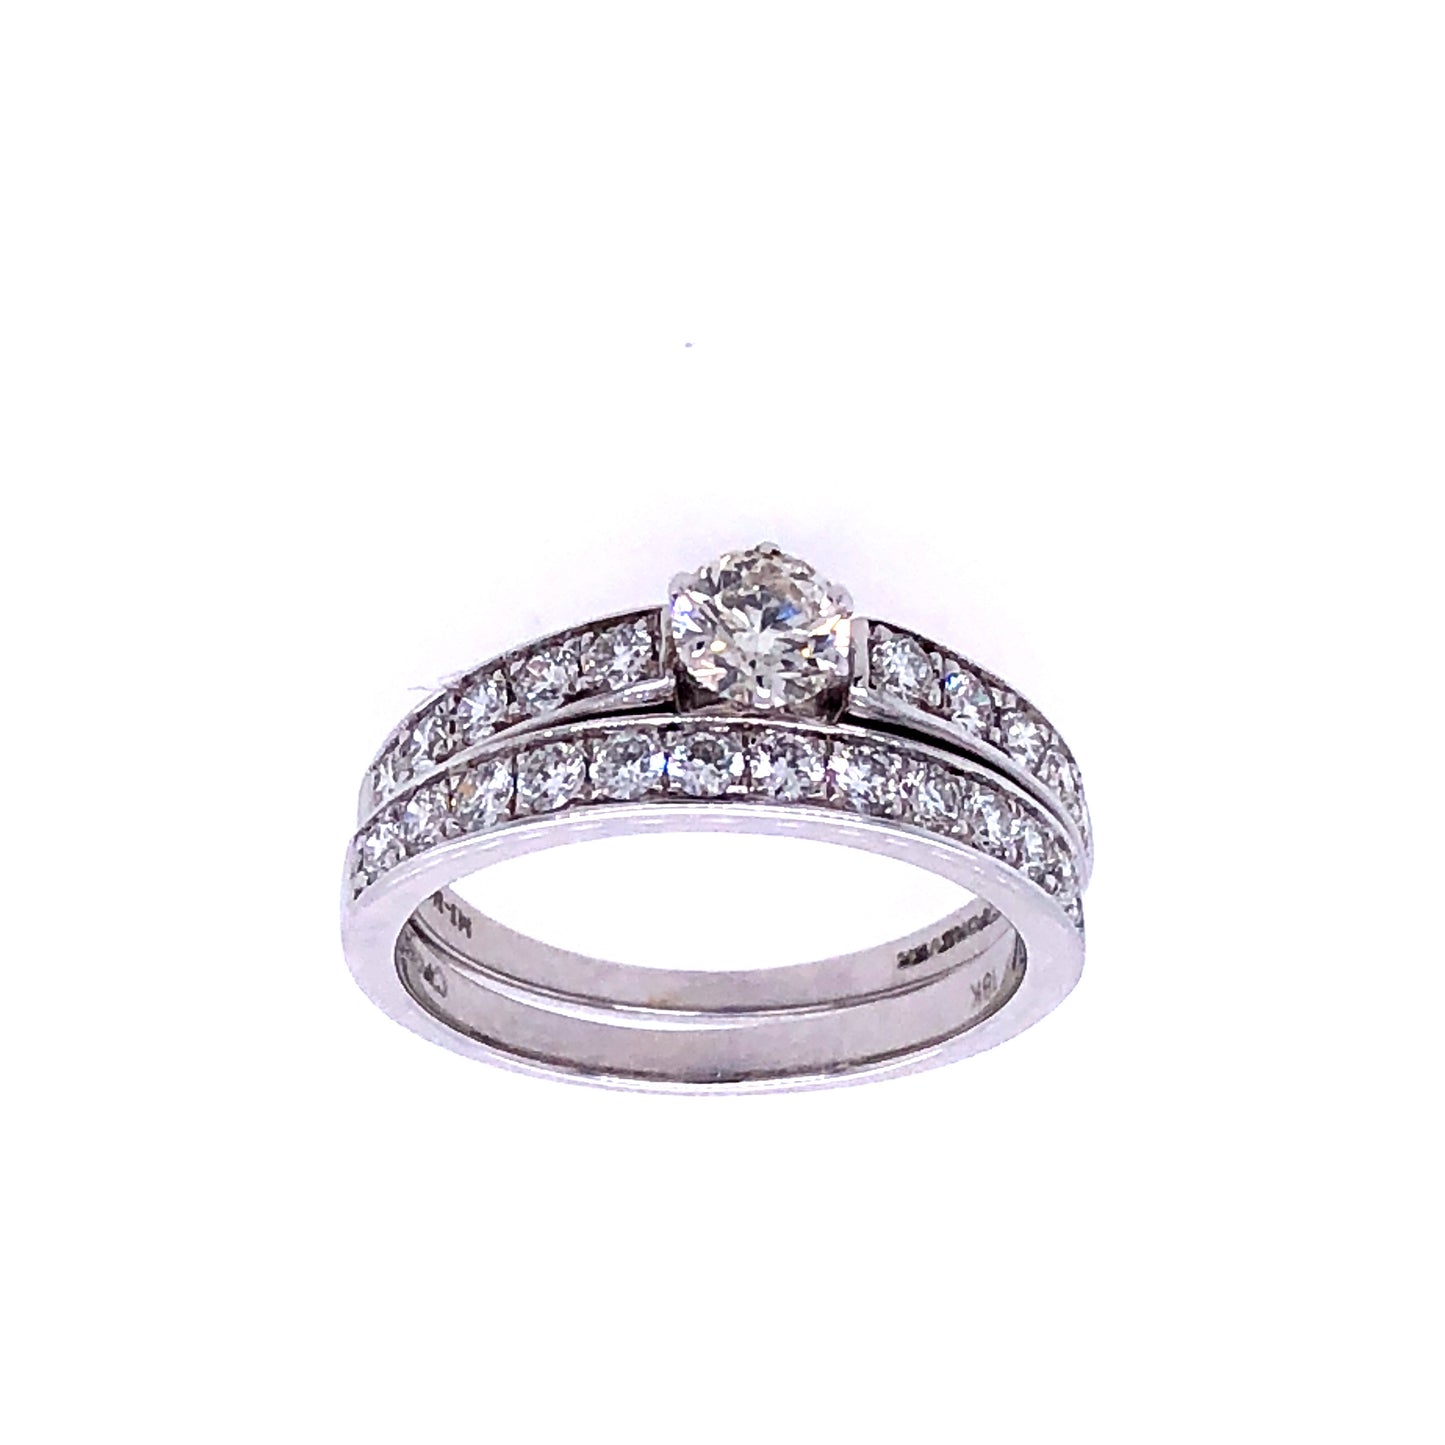 18k White Gold 1.00cts Cupid Cut Diamonds Wedding Ring Set | Luby Diamond Collection | Luby 